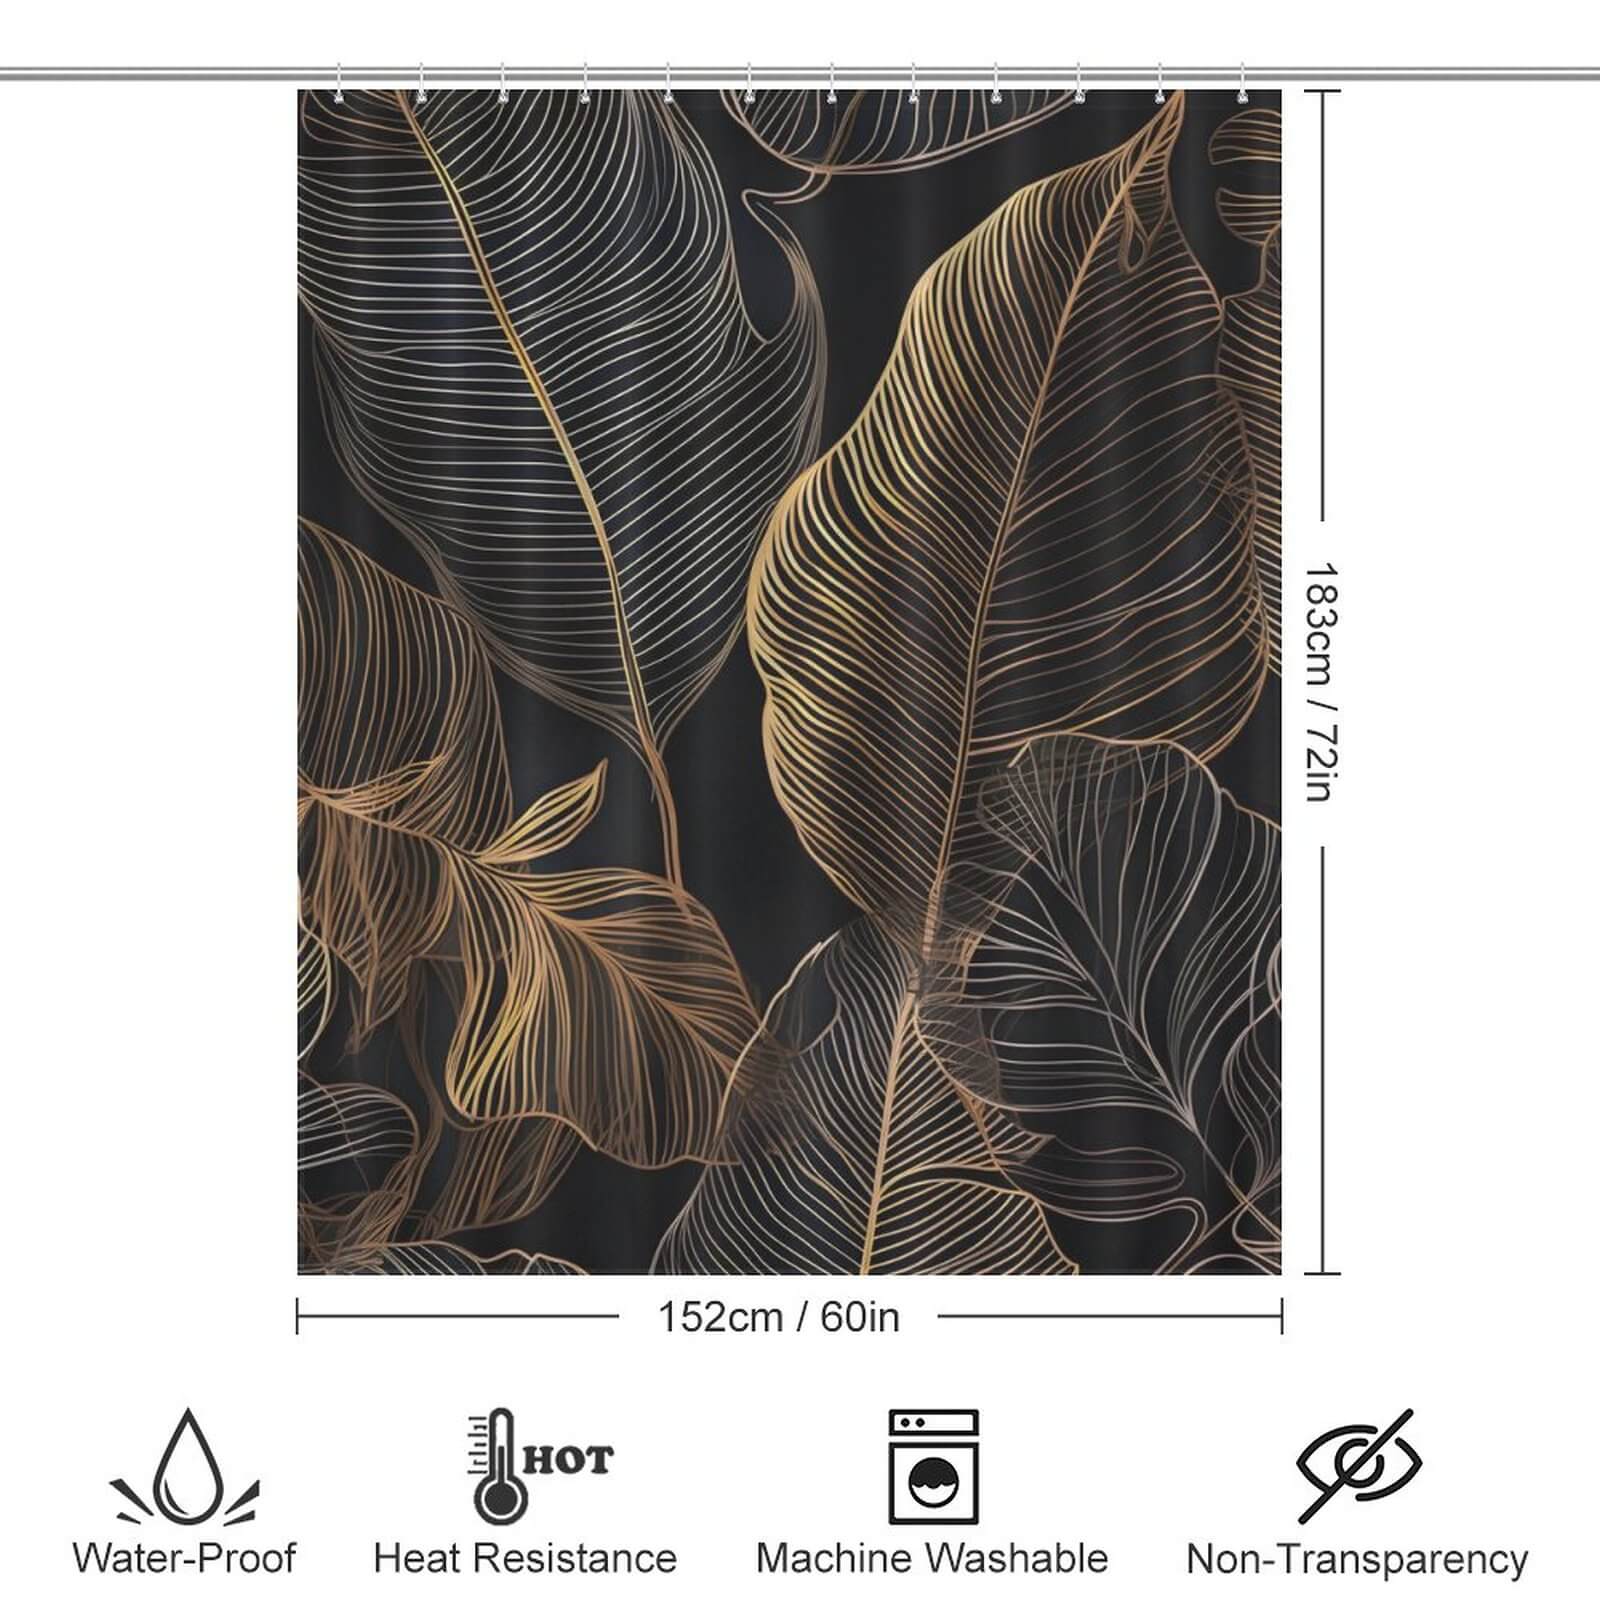 A waterproof Golden Tropical Leaves Jungle shower curtain, perfect for bathroom decor by Cotton Cat.